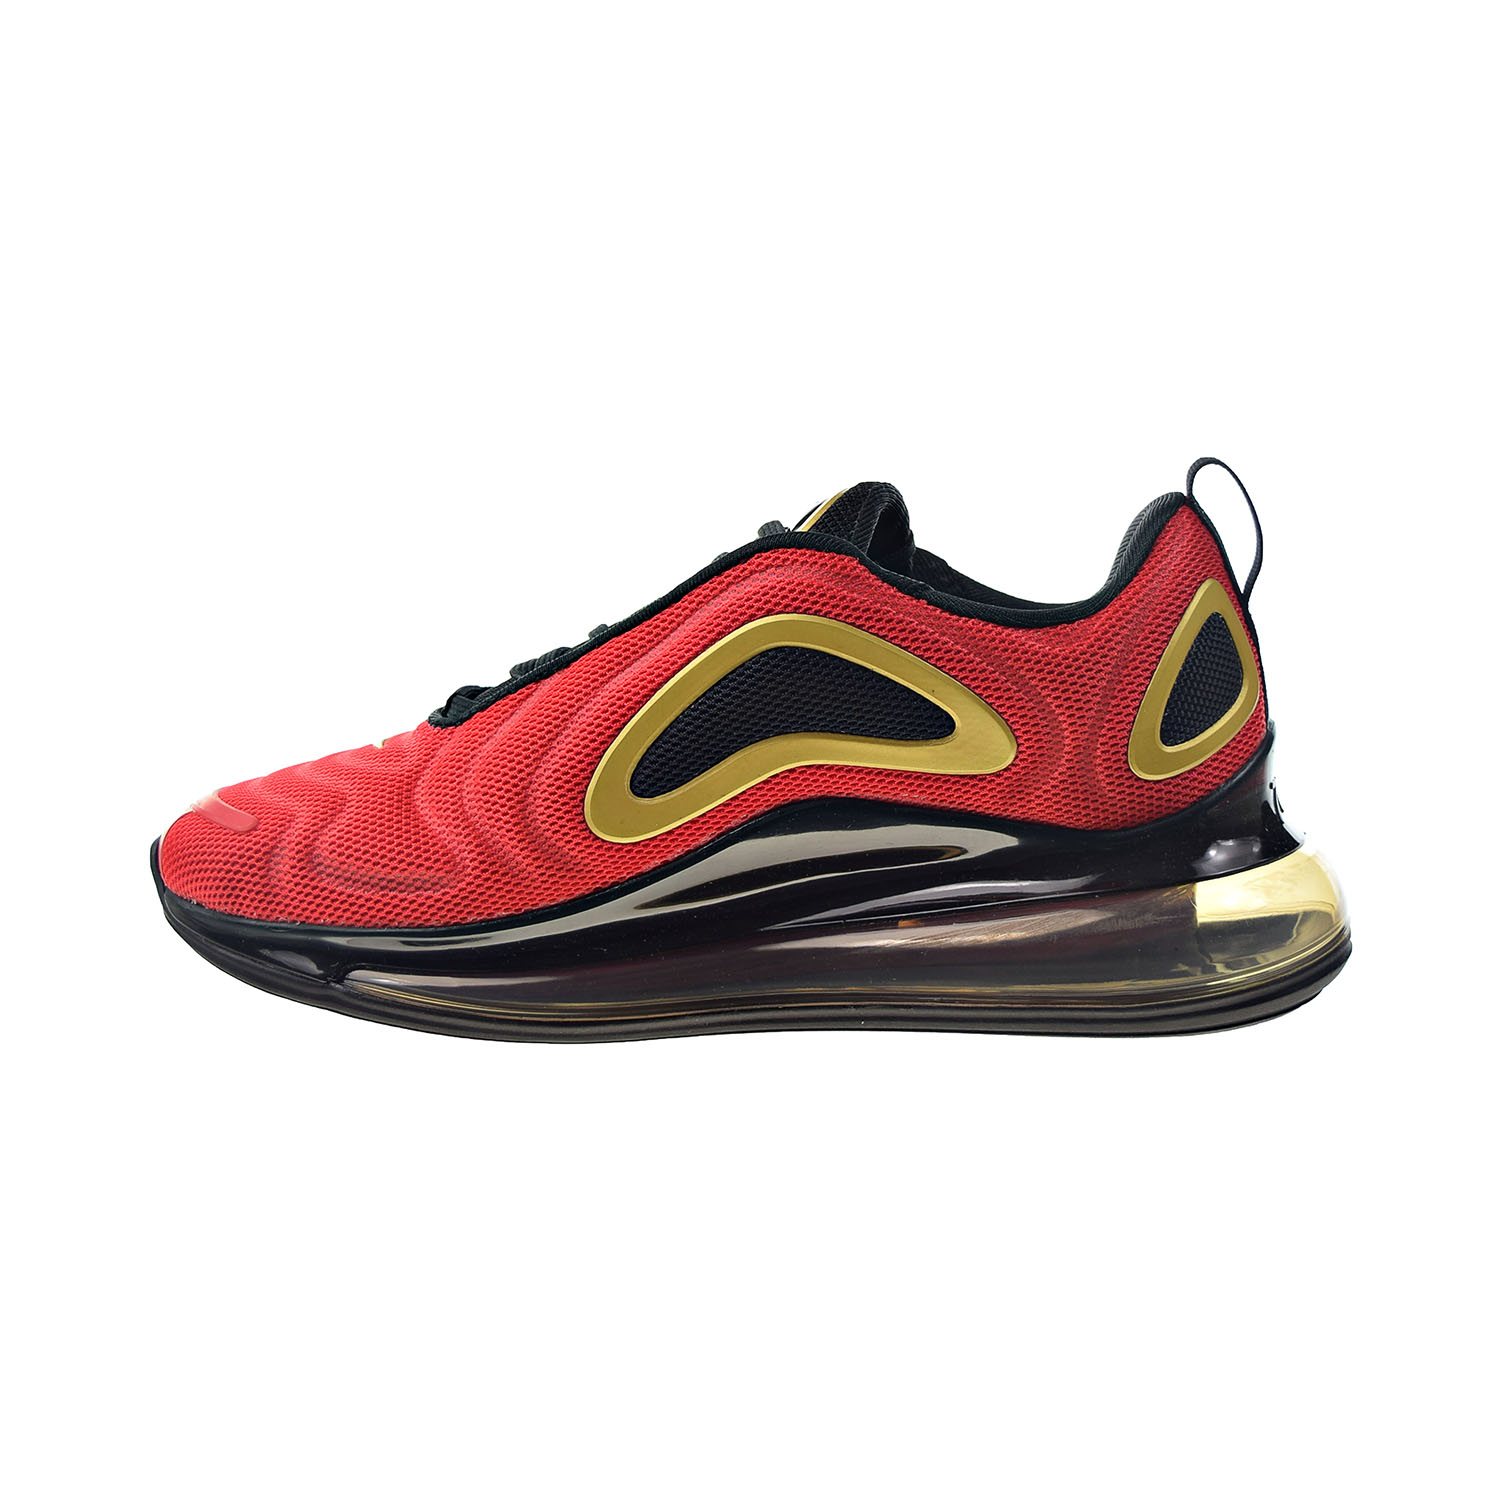 Nike Air Max 720 Women's Shoes University Red-Black cu4871-600 - image 4 of 6